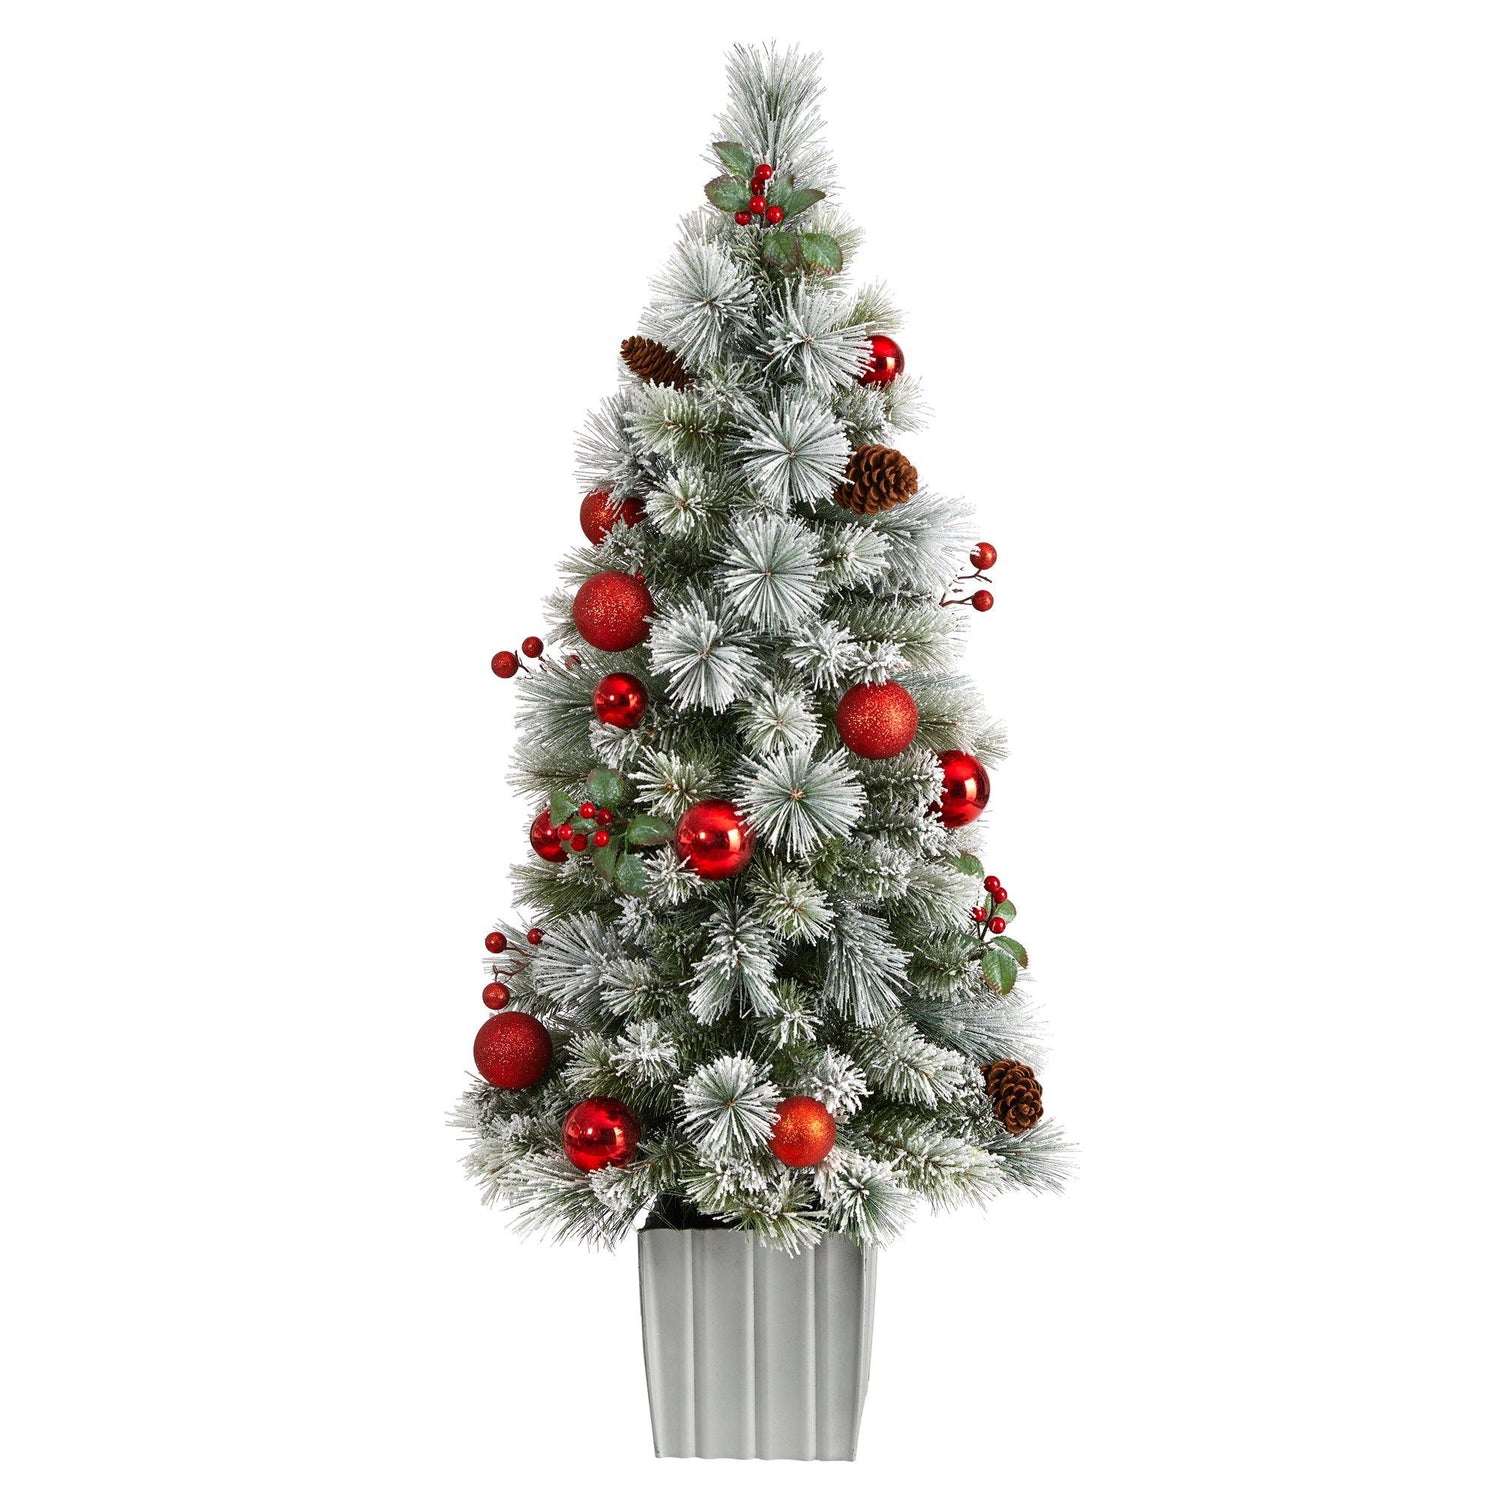 4' Winter Flocked Christmas Tree Pre-Lit with 50 Lights and Ornaments in Decorative Planter